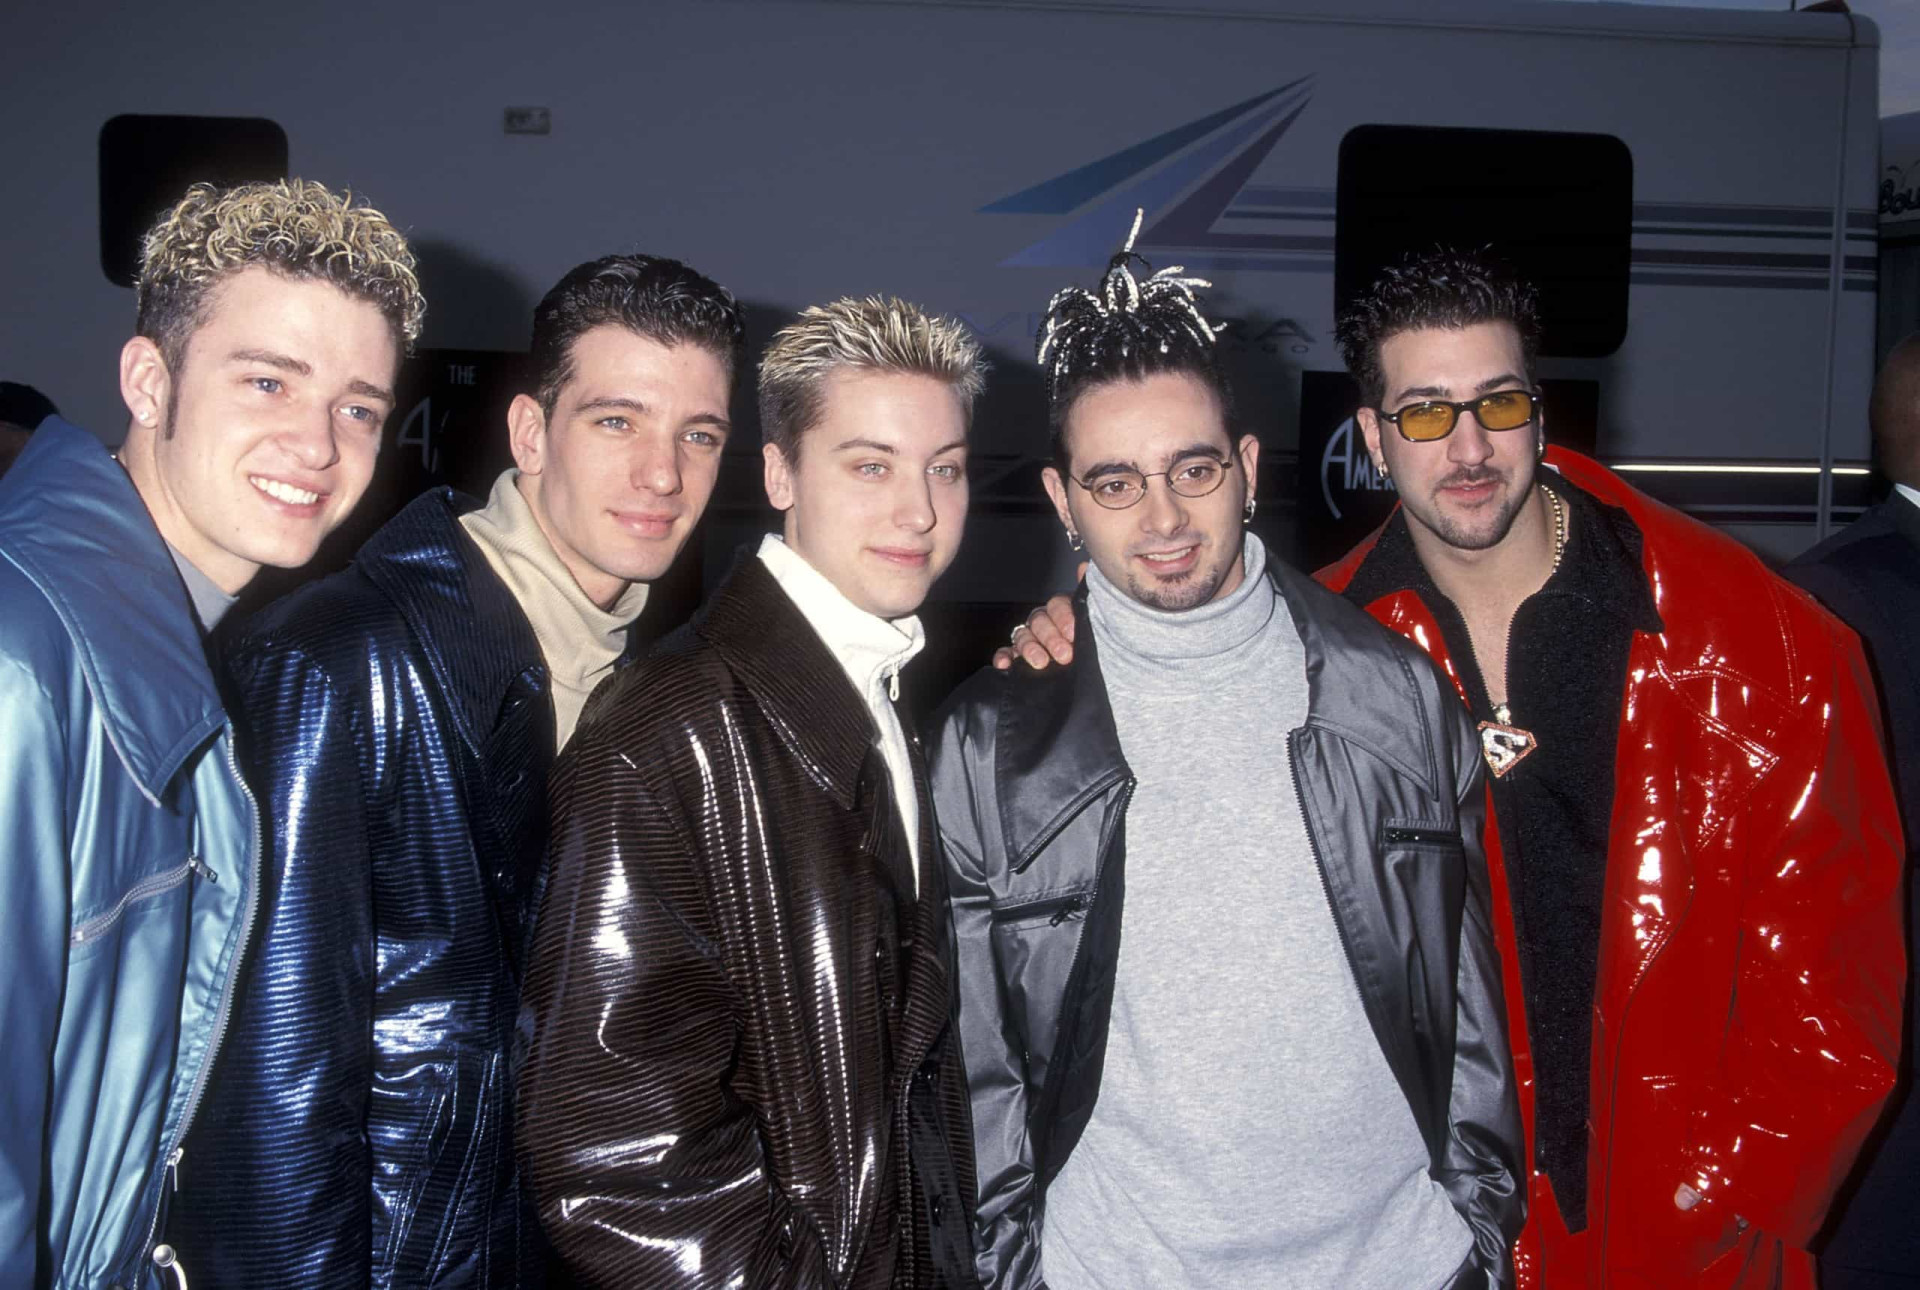 <p>The memory of the boy band persists, having influenced a generation to wear colored camouflage pants and pleather jackets with turtle necks. Frosted tips were the cherry on top. </p><p>You may also like:<a href="https://www.starsinsider.com/n/464484?utm_source=msn.com&utm_medium=display&utm_campaign=referral_description&utm_content=624139en-ae"> Are you emotionally mature? Here are the signs</a></p>